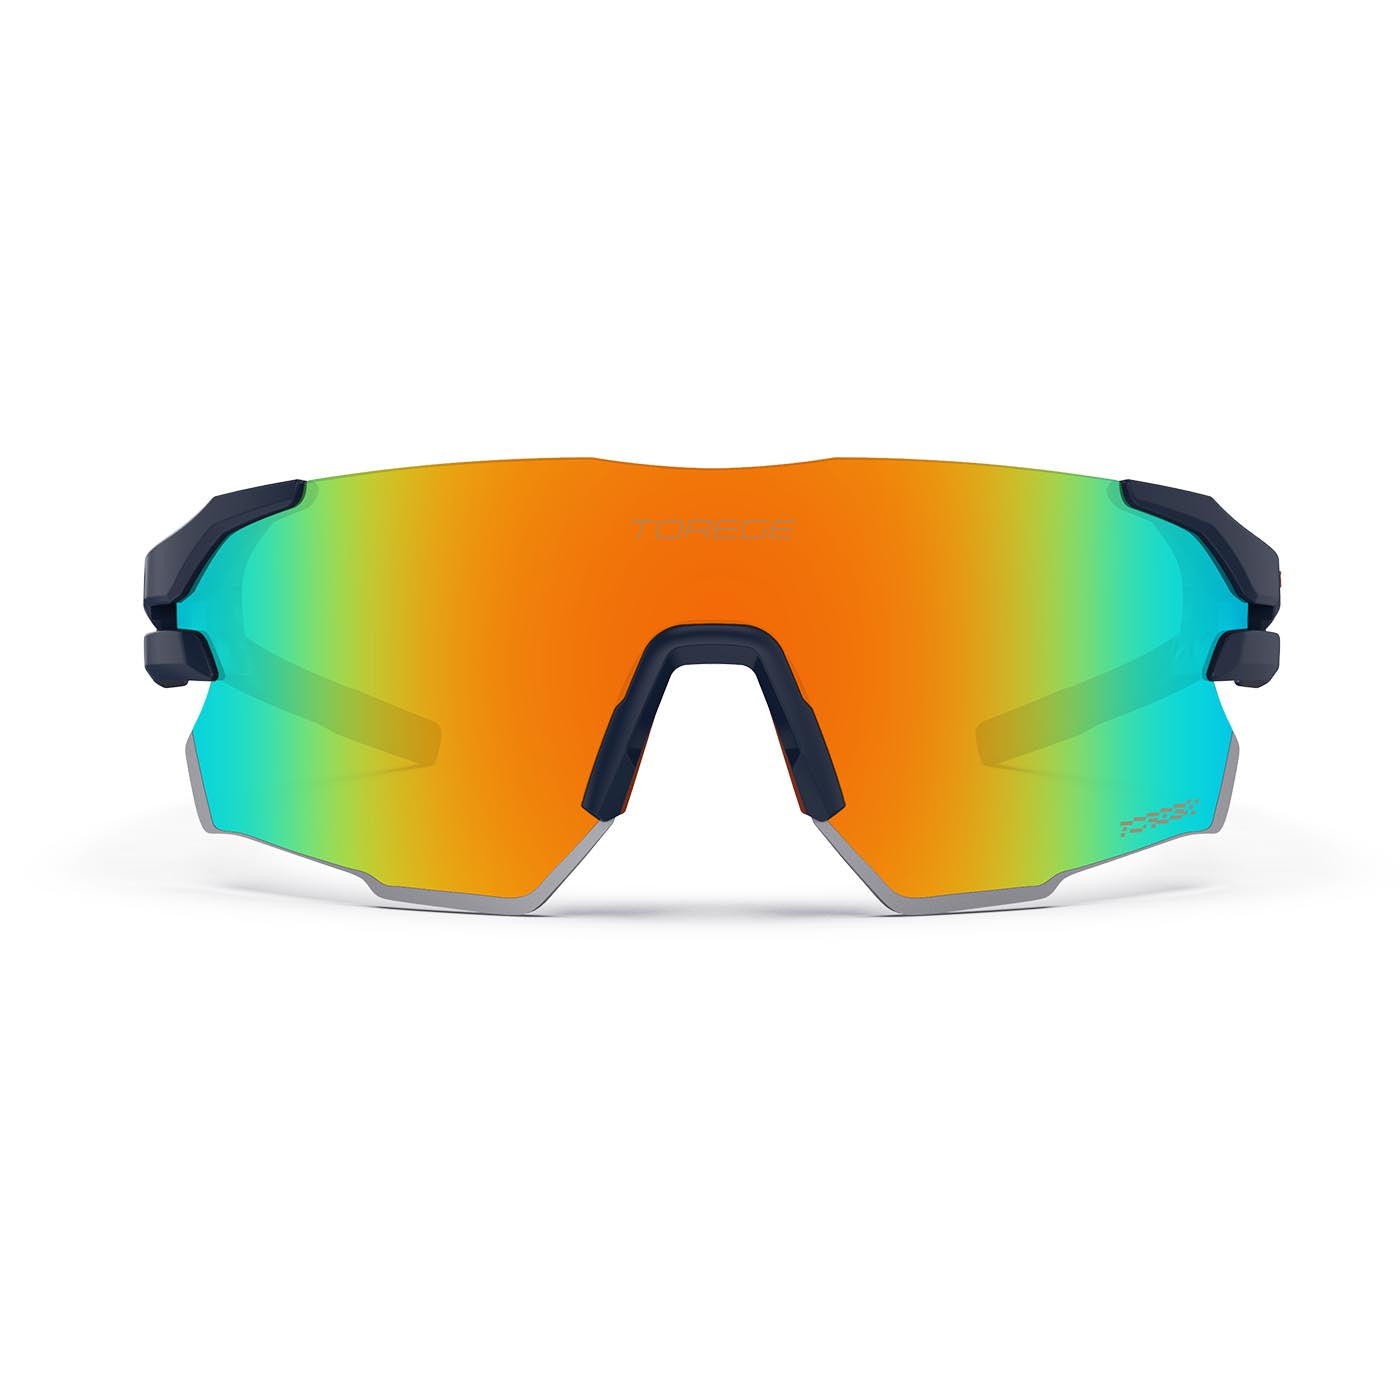 Tempation Ultra Women Fishing, and Perfect Frame and Running Men Lightweight - Lens Golf, Lifetime Sport Active for for & Sunlight Blue Sunglasses Orange Matte - Wraparound Cycling, With Hiking, Warranty